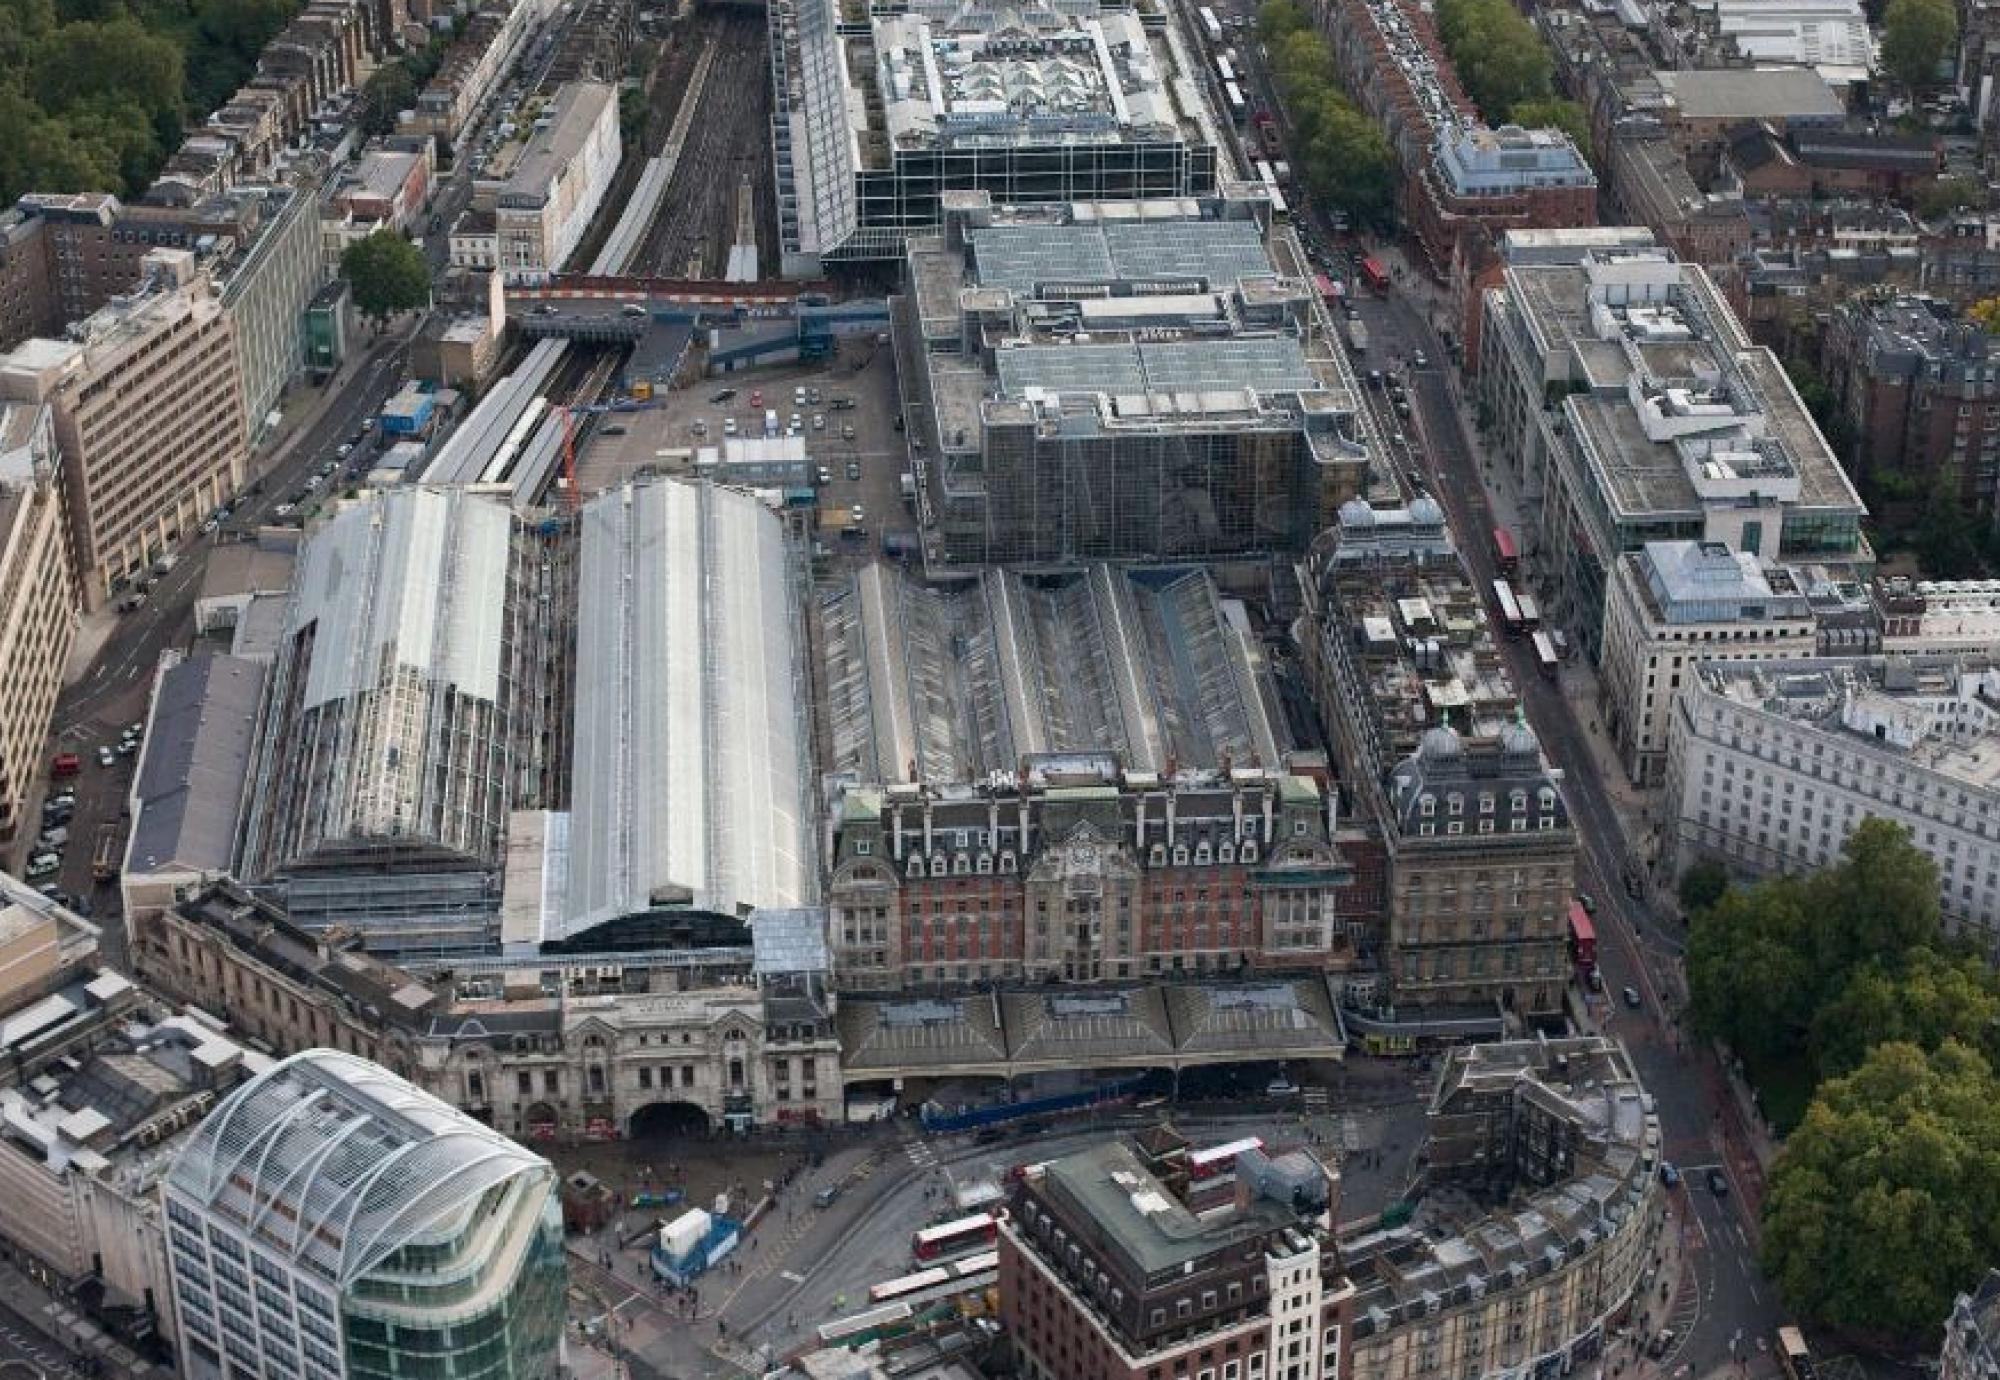 Aerial view of Victoria station - part of a huge resignalling project